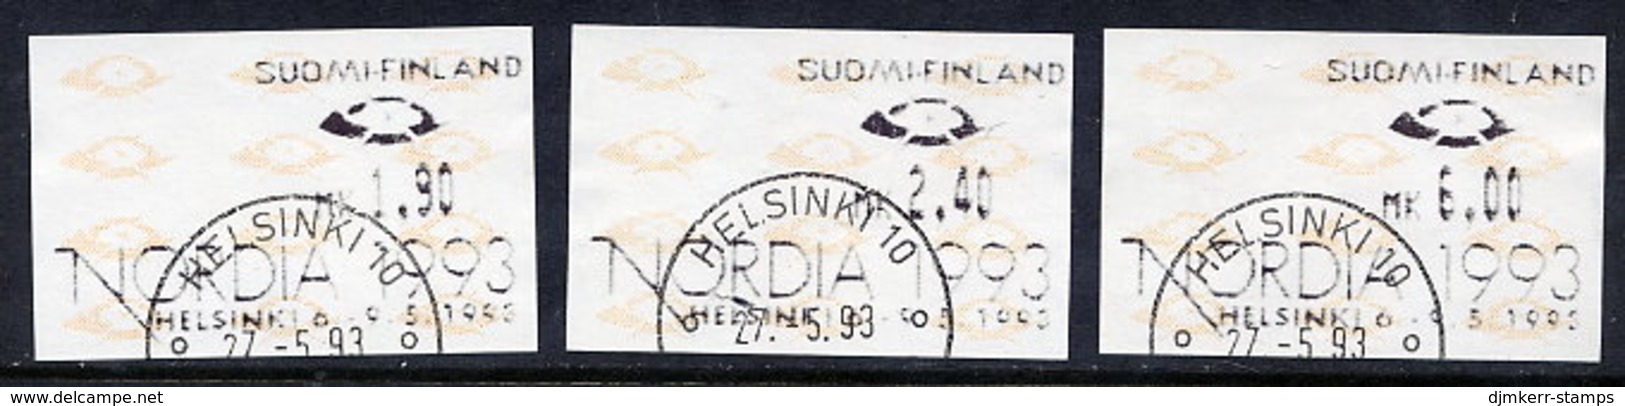 FINLAND 1993 NORDIA '93 1991 Thermal Print Type , 3 Different Values Used . As  Michel 10 - Vignette [ATM]